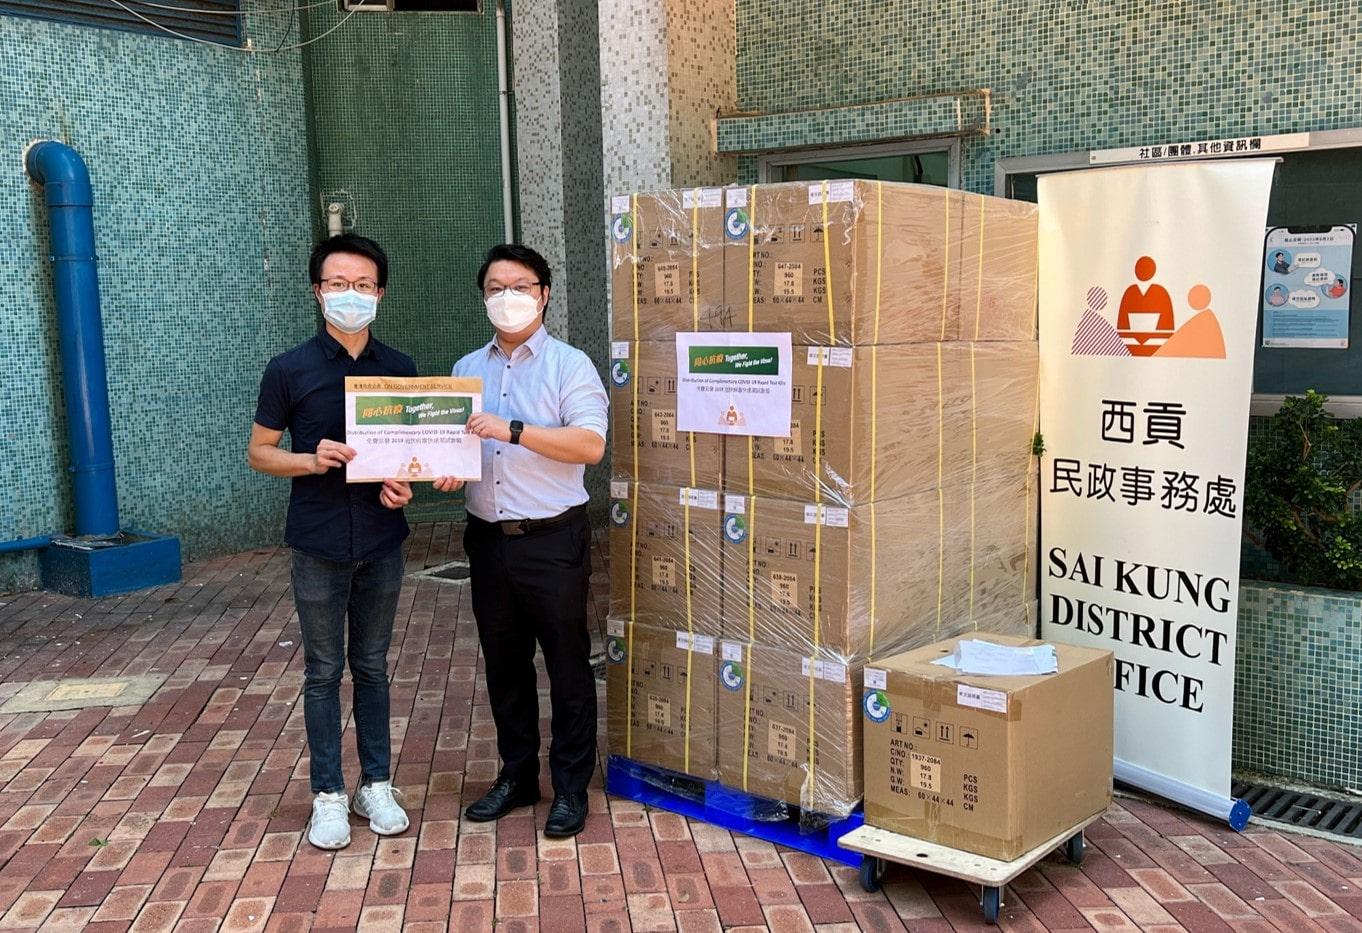 The Sai Kung District Office today (July 22) distributed COVID-19 rapid test kits to households, cleansing workers and property management staff living and working in Chung Ming Court for voluntary testing through the property management company.